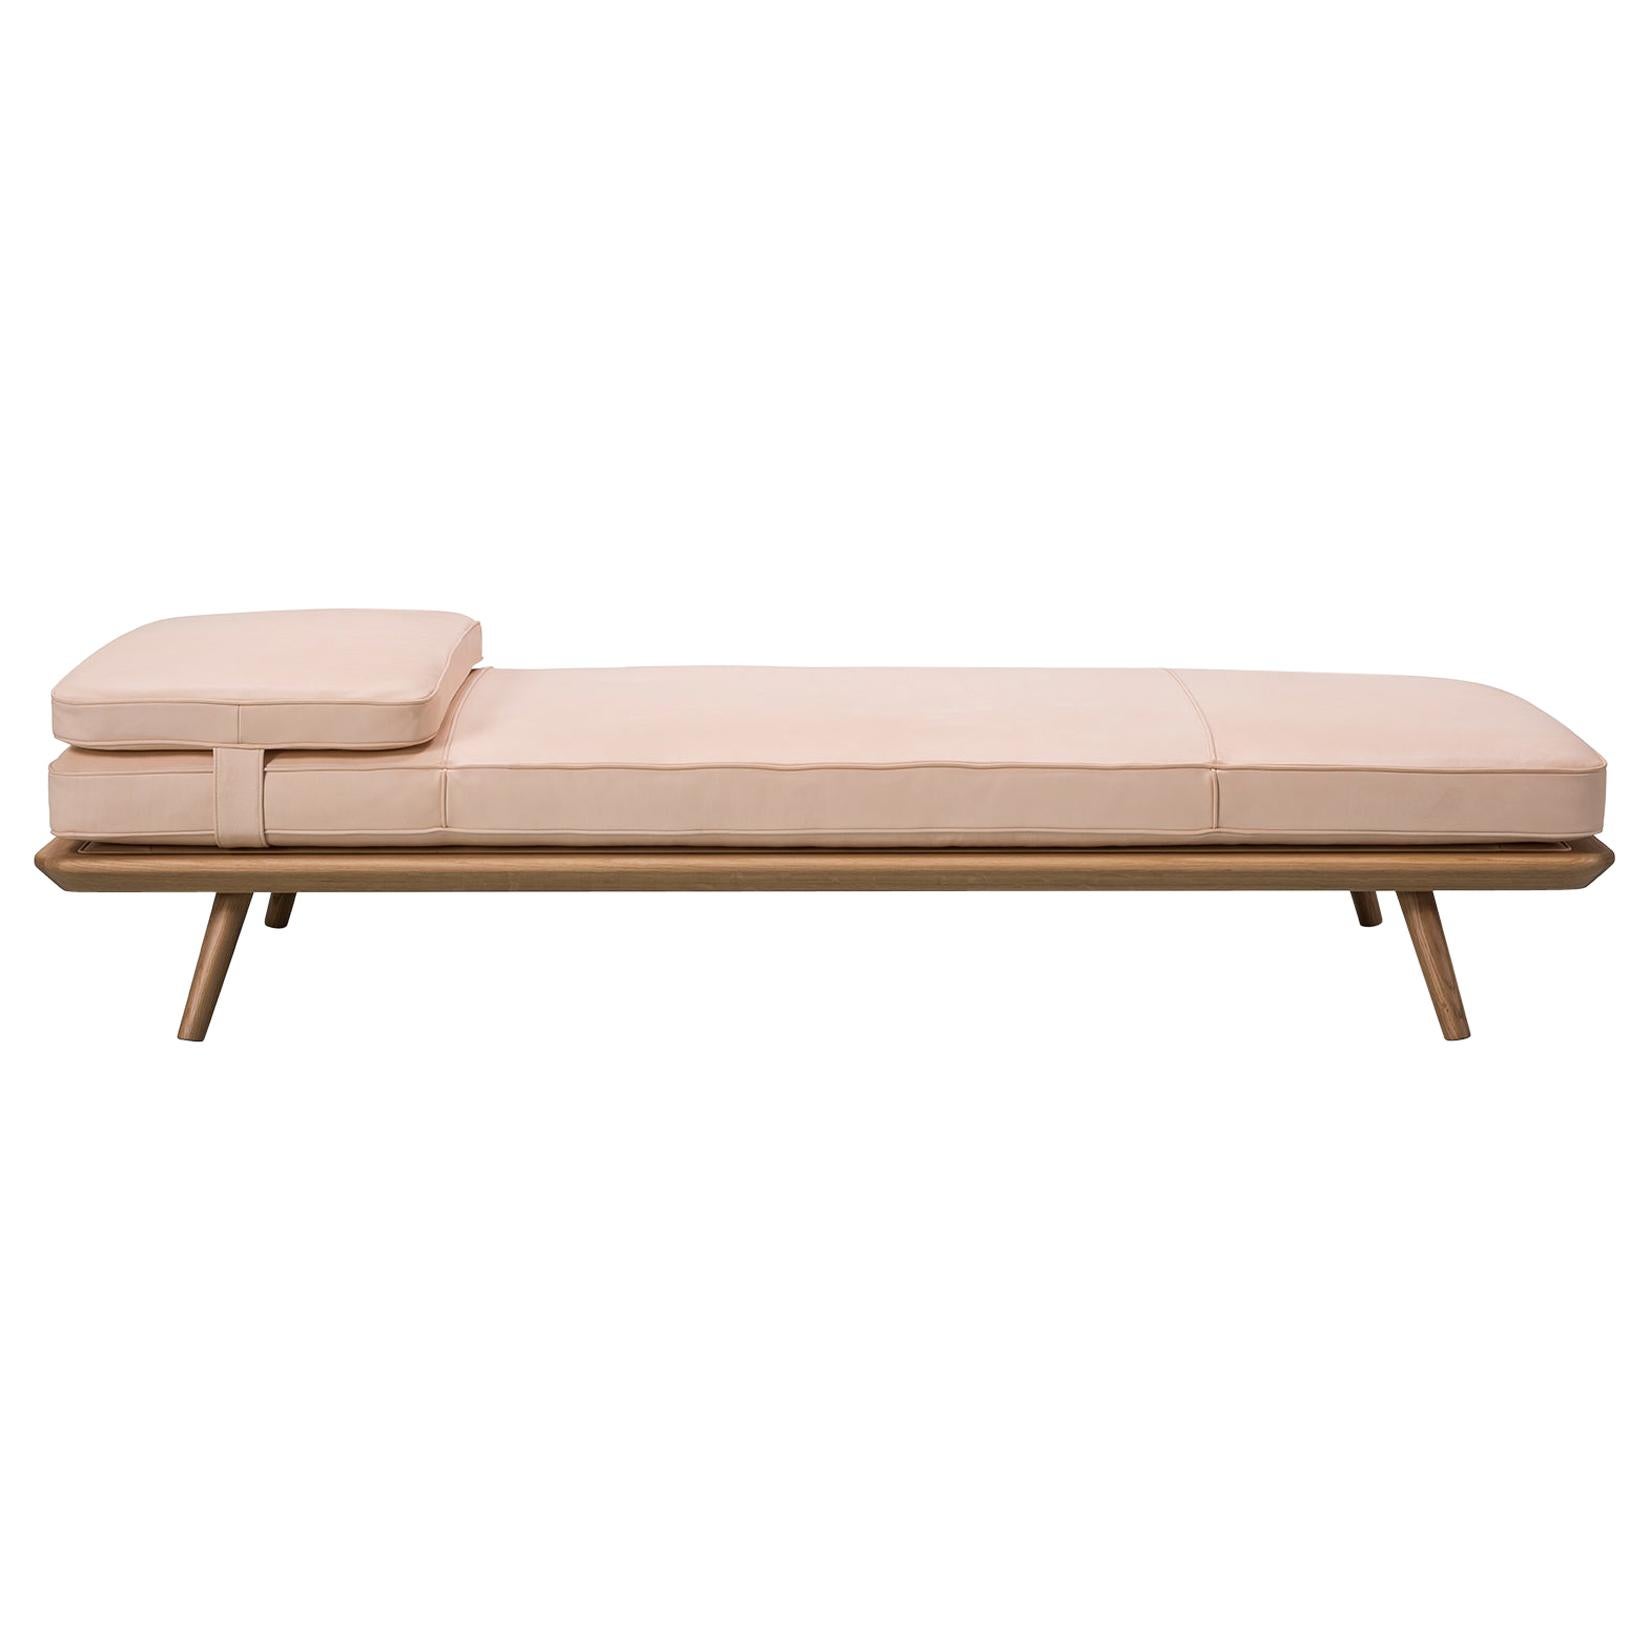 Space Copenhagen Spine Daybed For Sale